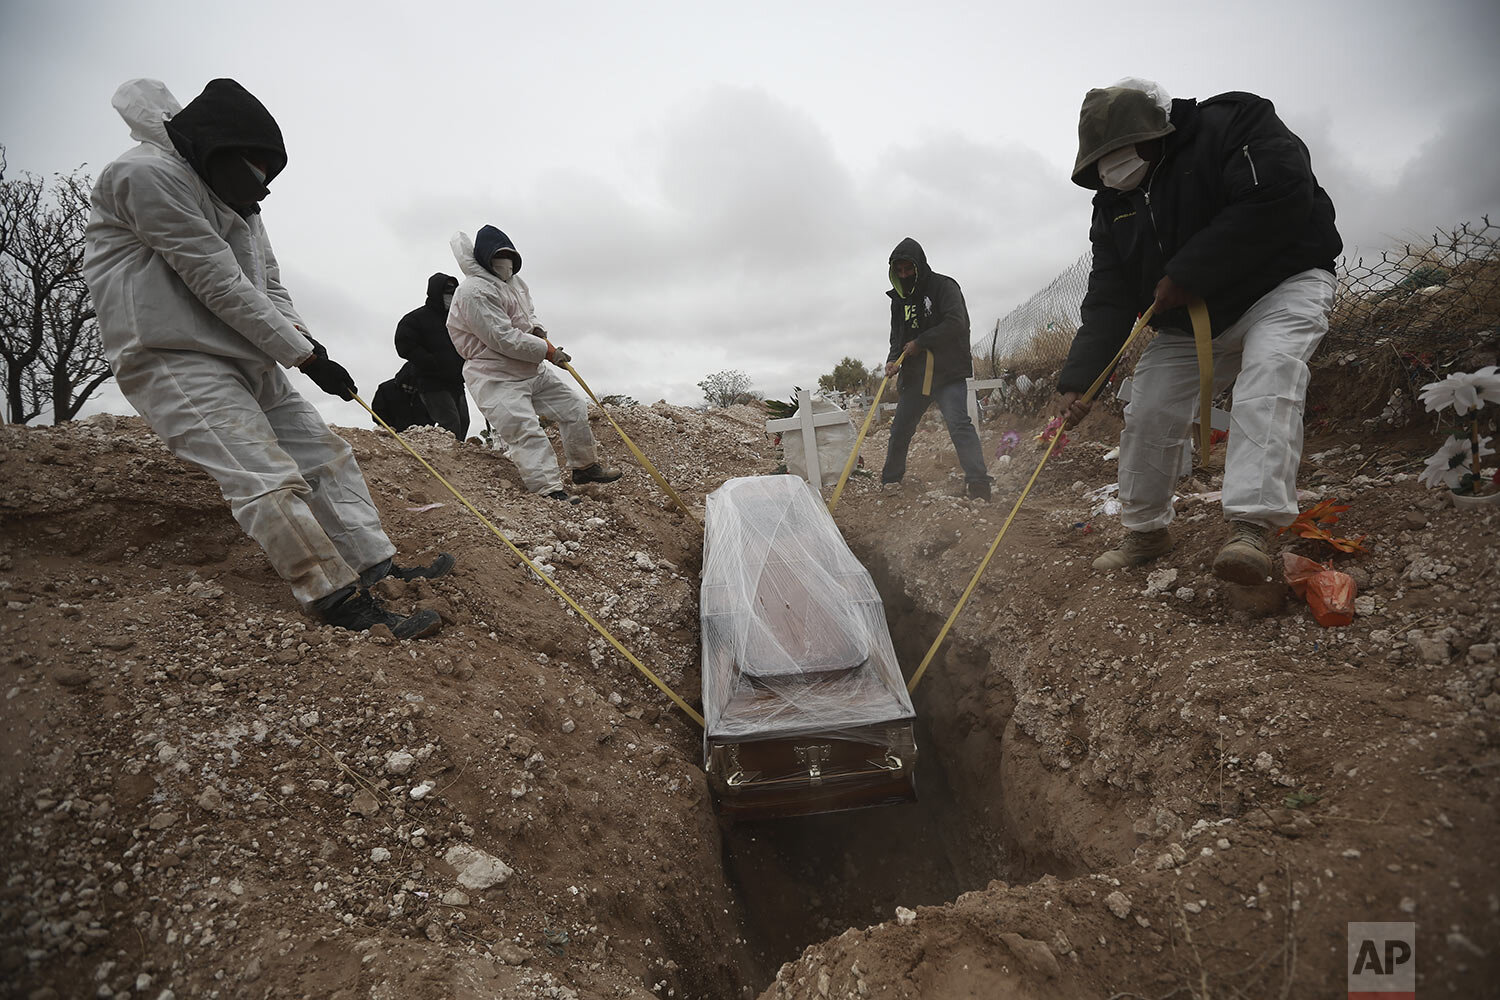  Workers wearing full protection gear amid the new coronavirus pandemic, lower a coffin into a grave in an area of the San Rafael municipal cemetery set apart for people who have died from COVID-19, in Ciudad Juarez, Mexico, Oct. 27, 2020. (AP Photo/